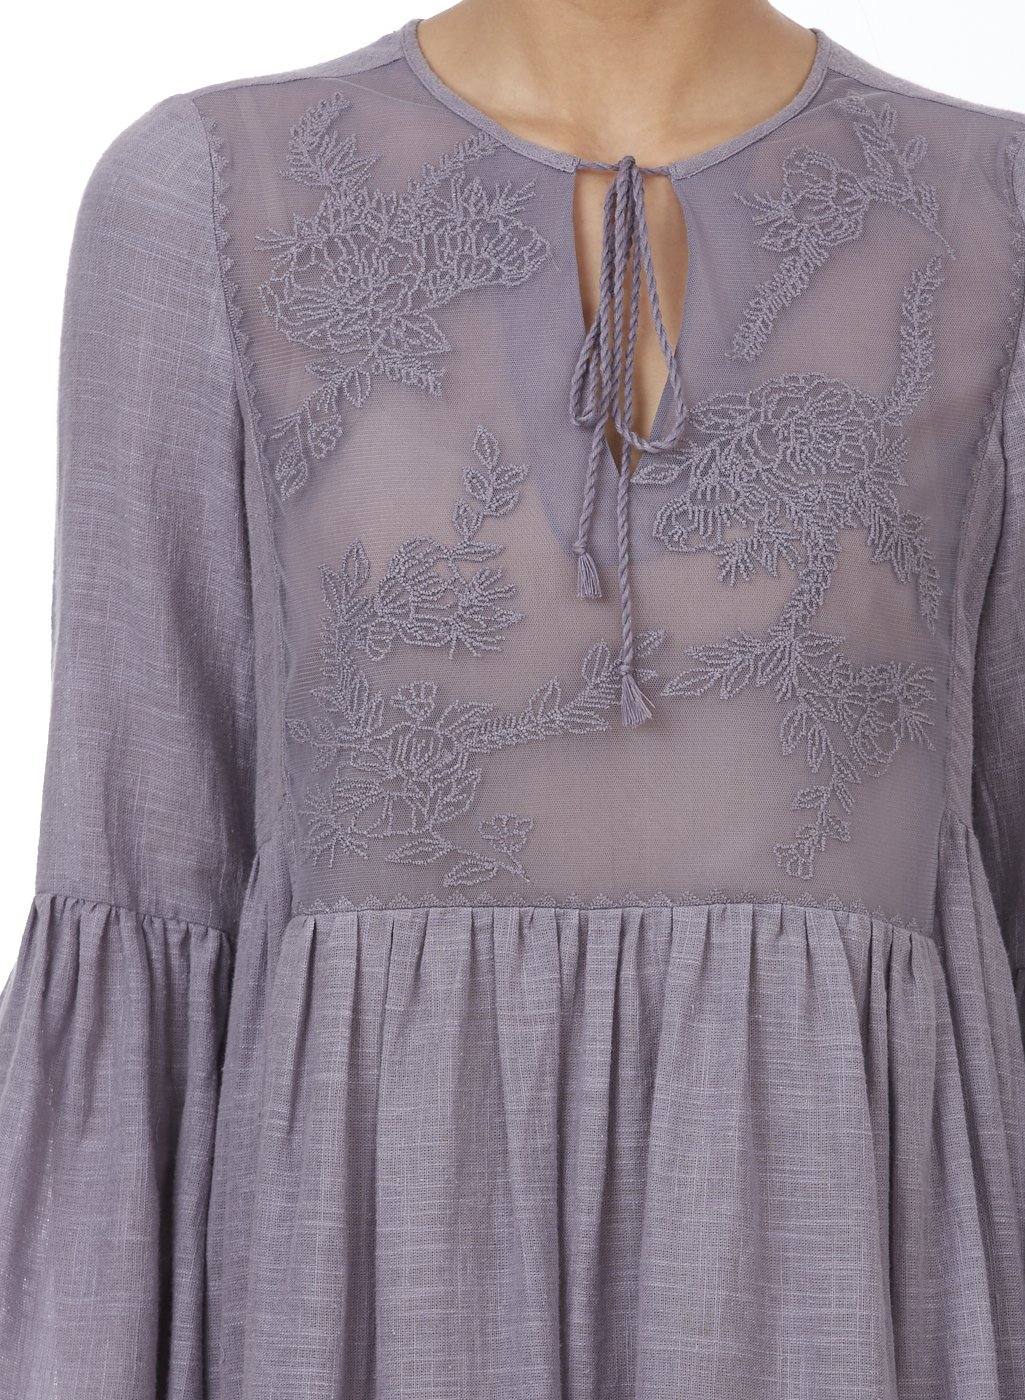 MIA EMBROIDERED DRESS - Genes online store 2020